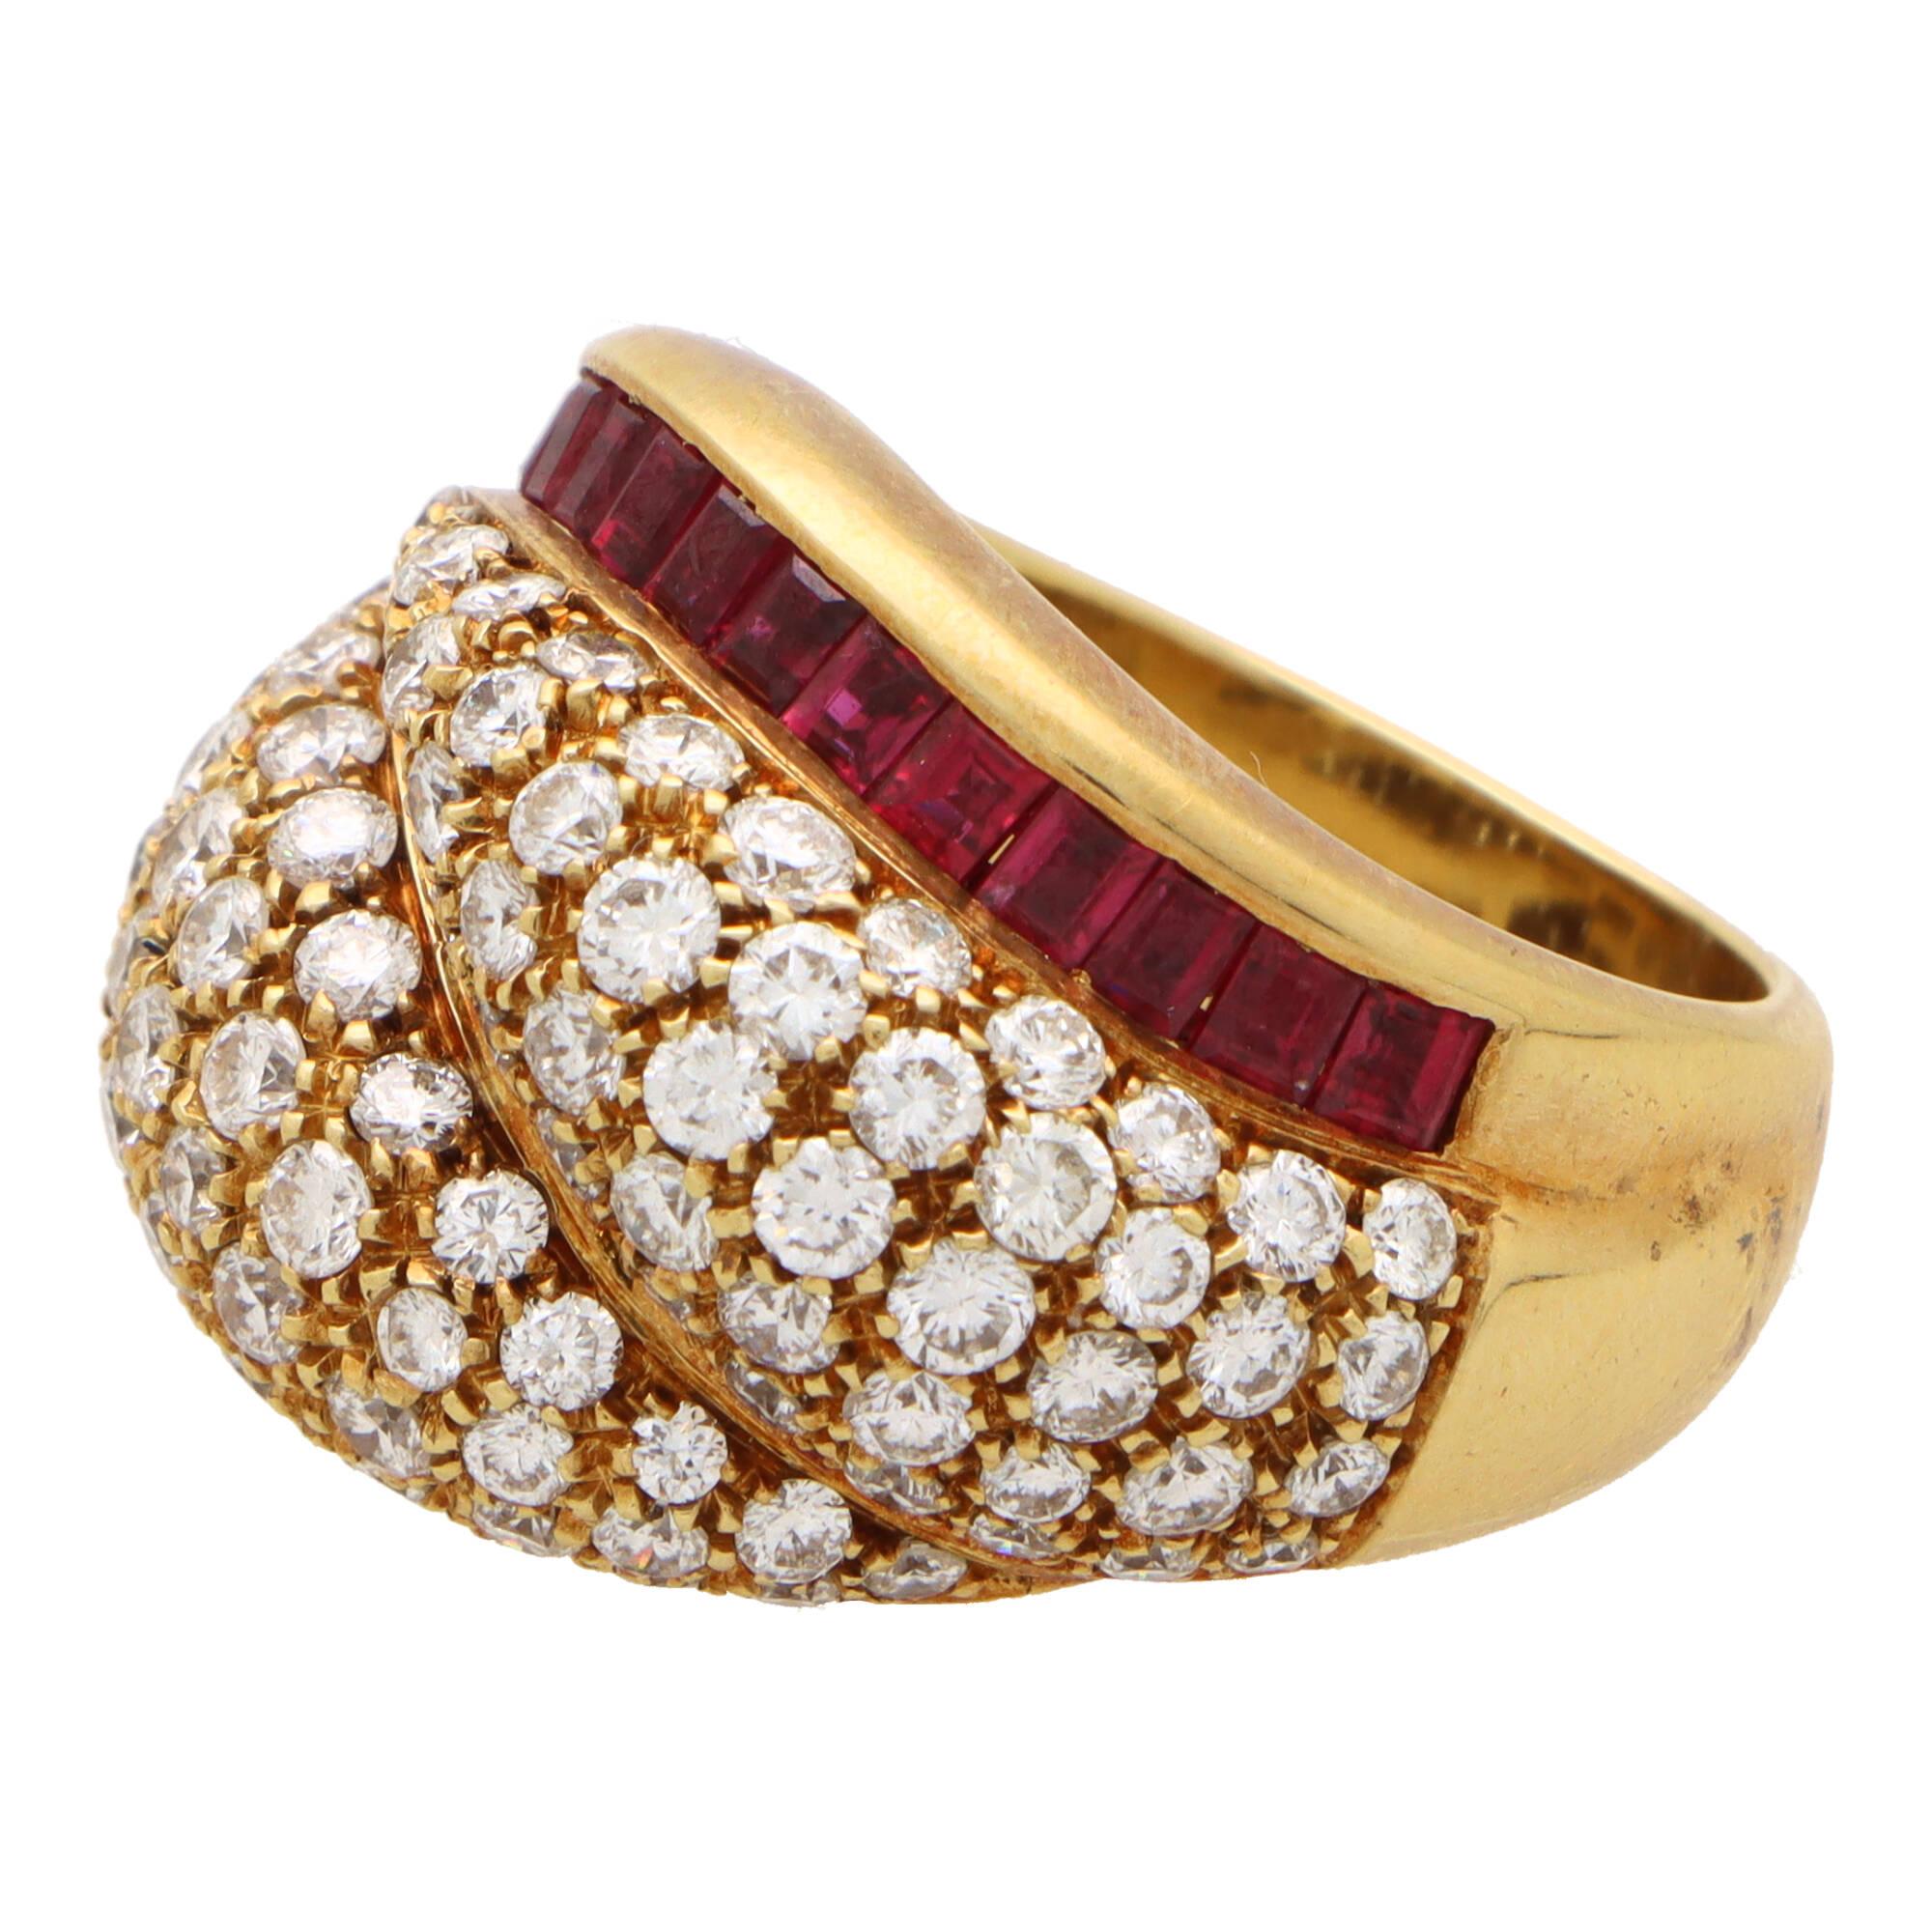 Vintage 1980's Tiffany & Co. Diamond and Ruby Bombé Ring in 18k Yellow Gold For Sale 1